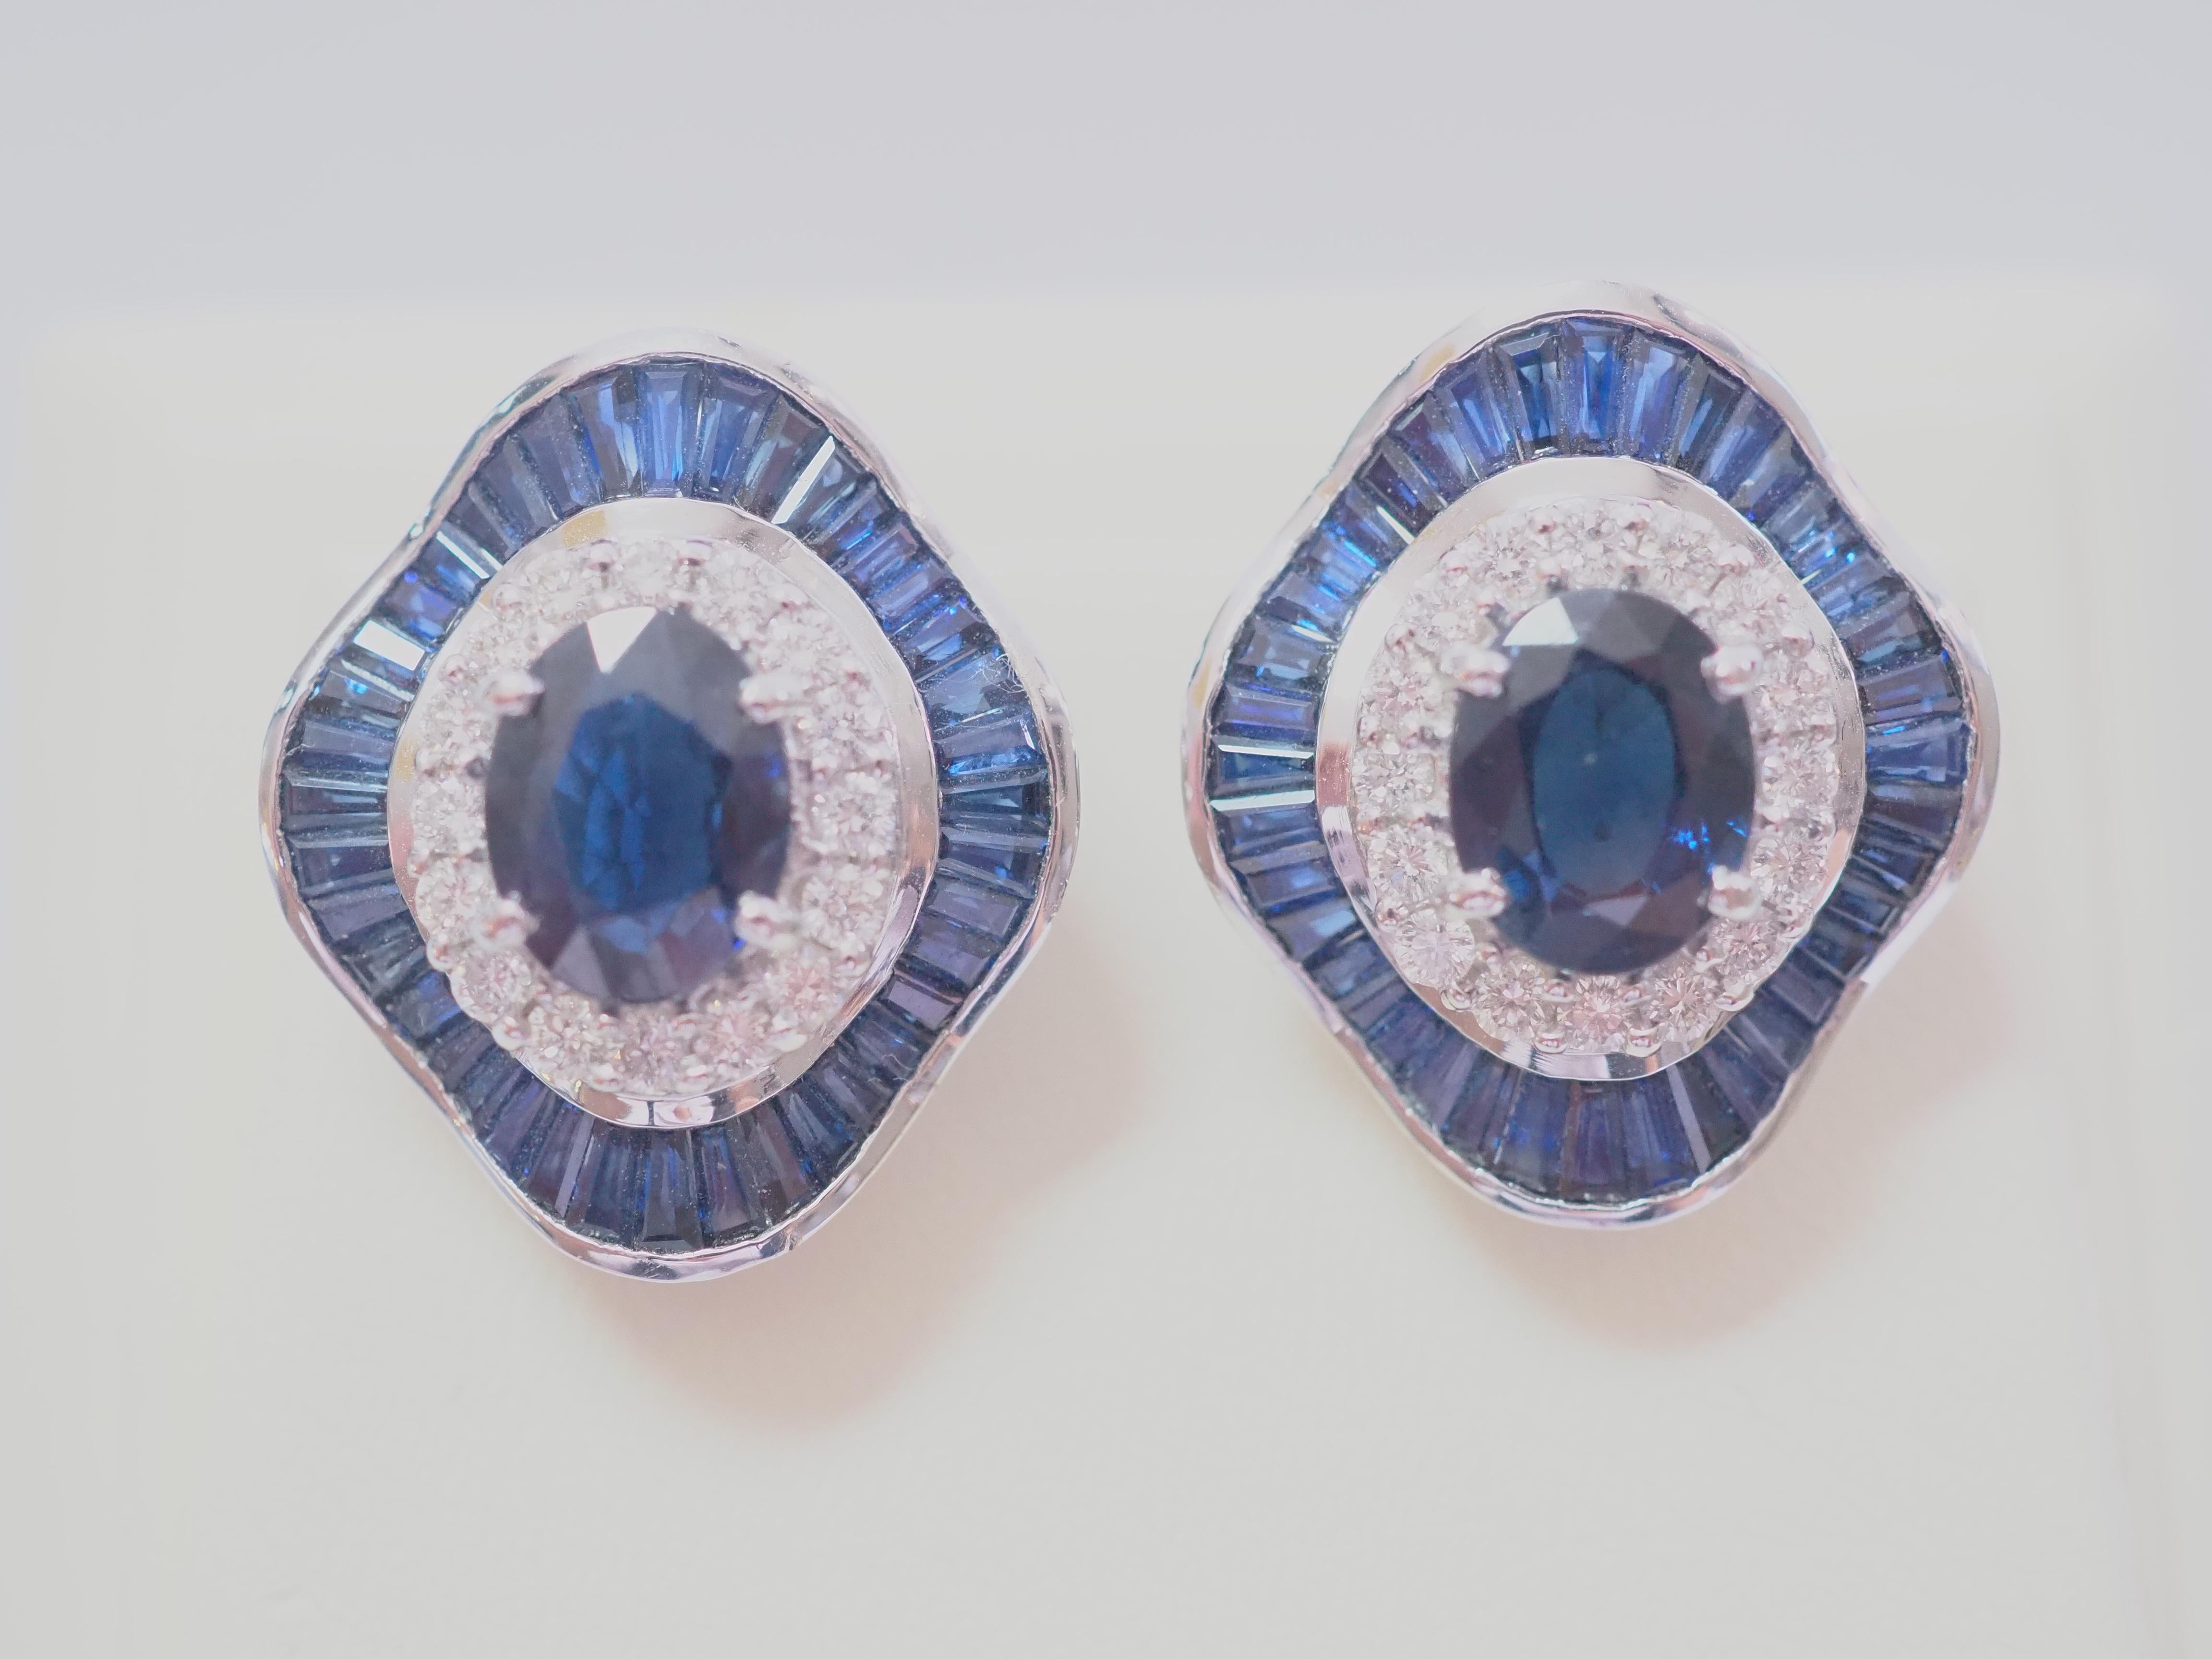 Beautiful and elegant from the bygone era blue sapphire and diamond earrings. Perfect for wearing every special occasion and events. Collectible piece of fine jewelry that is hard to find and to make nowadays! 

The blue sapphire has medium to dark